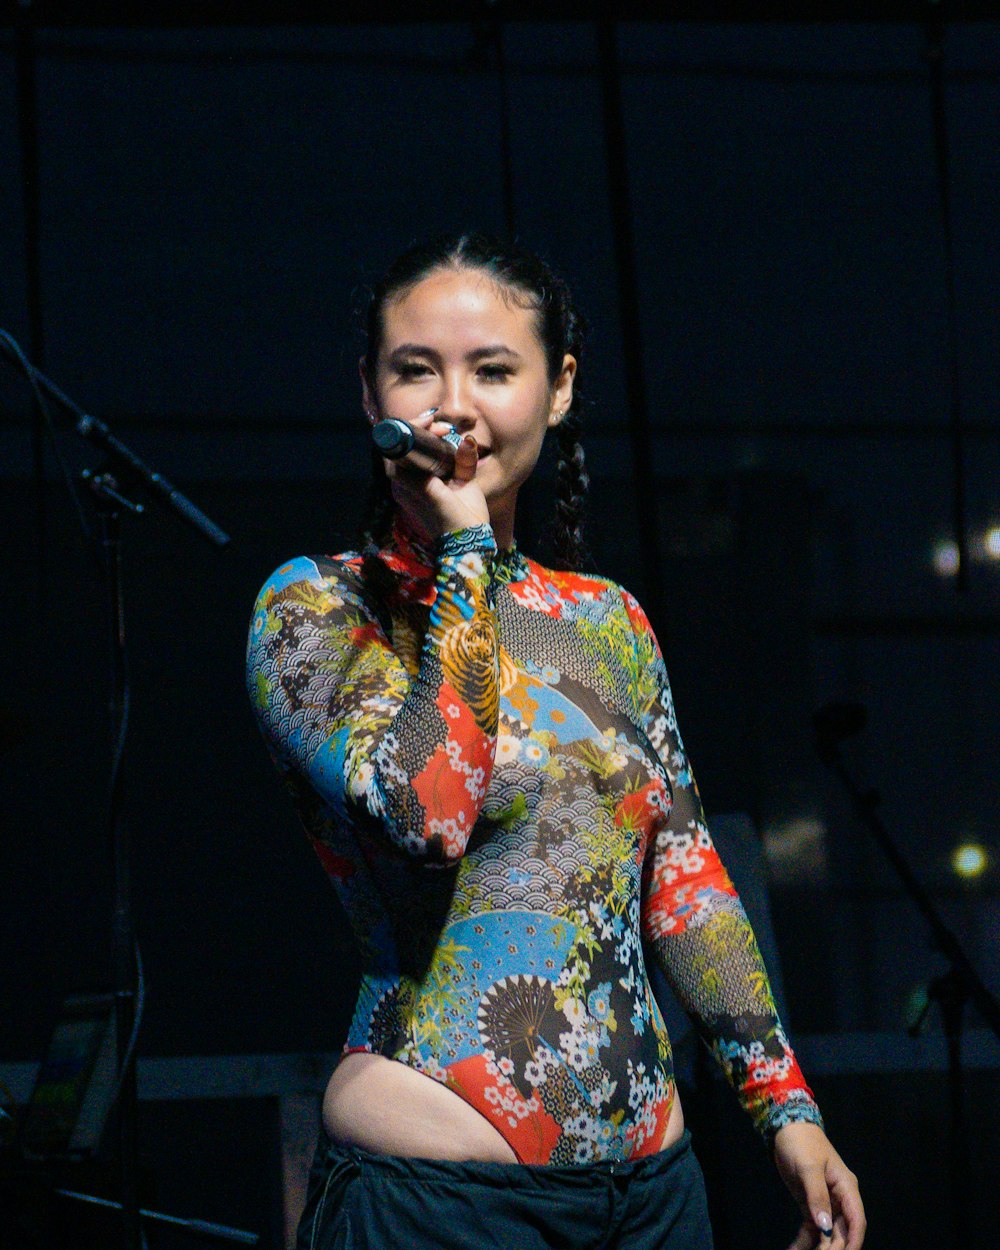 a woman in a colorful shirt singing into a microphone